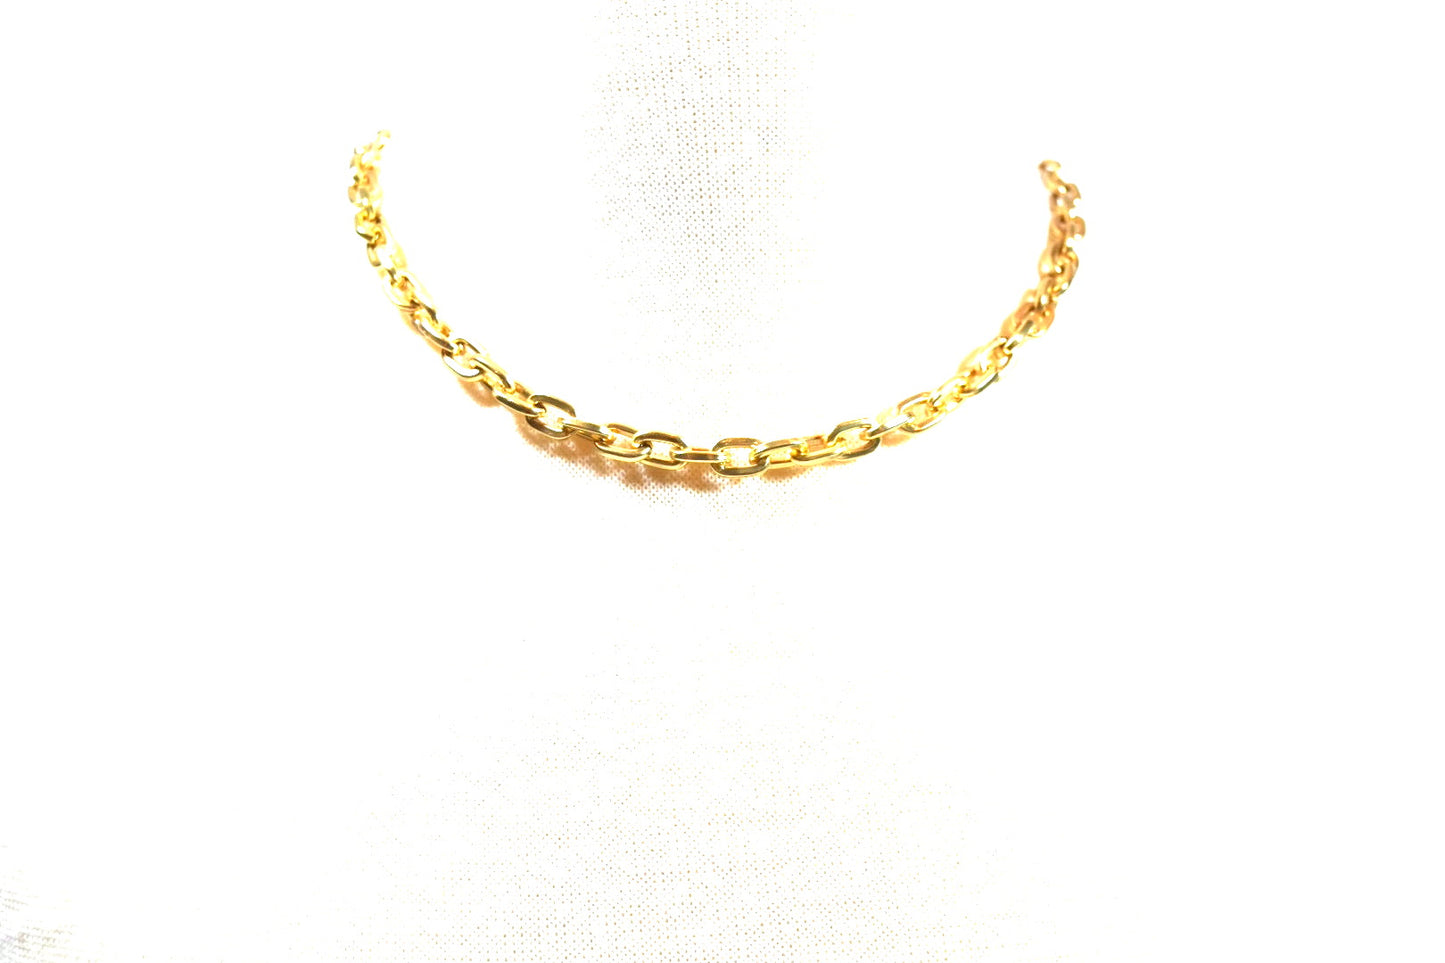 16 in chain choker in gold featuring toggle clasp.